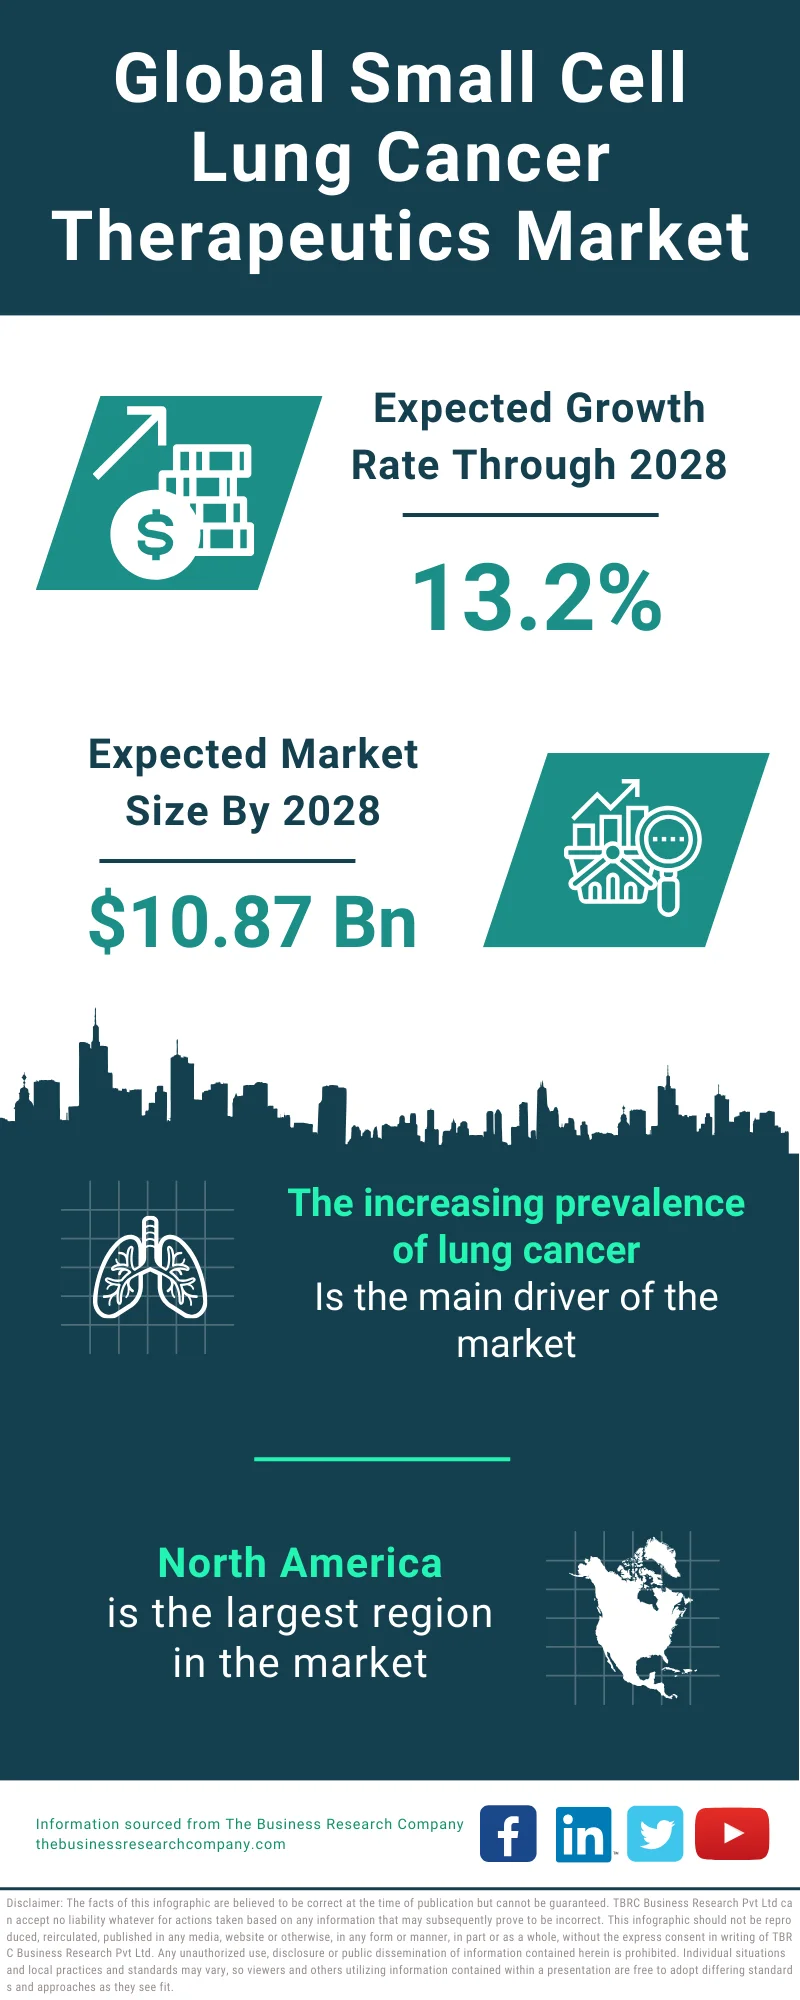 Small Cell Lung Cancer Therapeutics Global Market Report 2024 